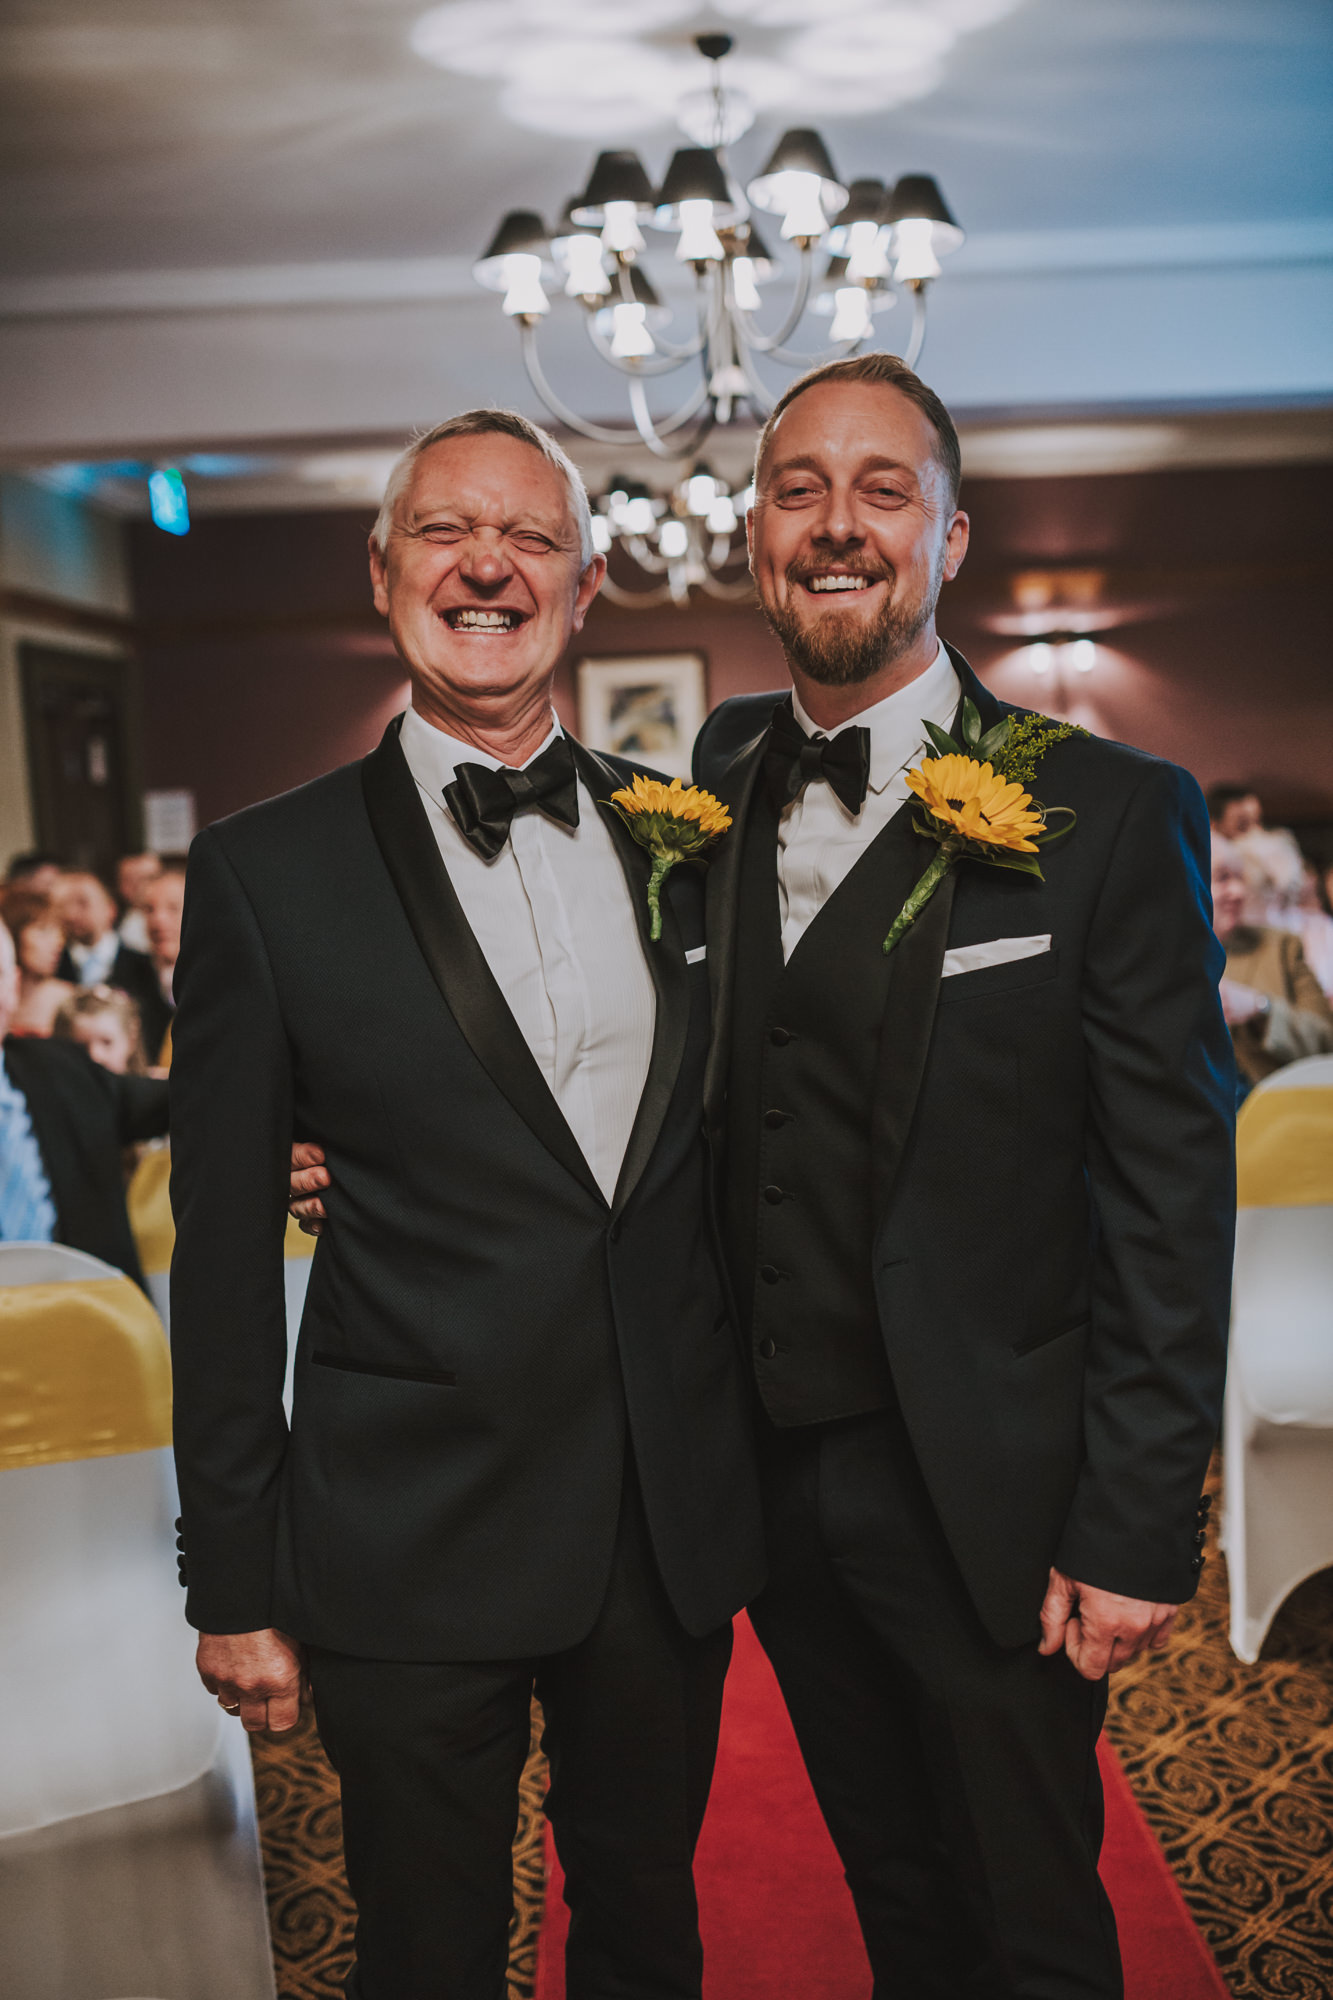 crown hotel bawtry wedding photographers in doncaster, yorkshire-17.jpg